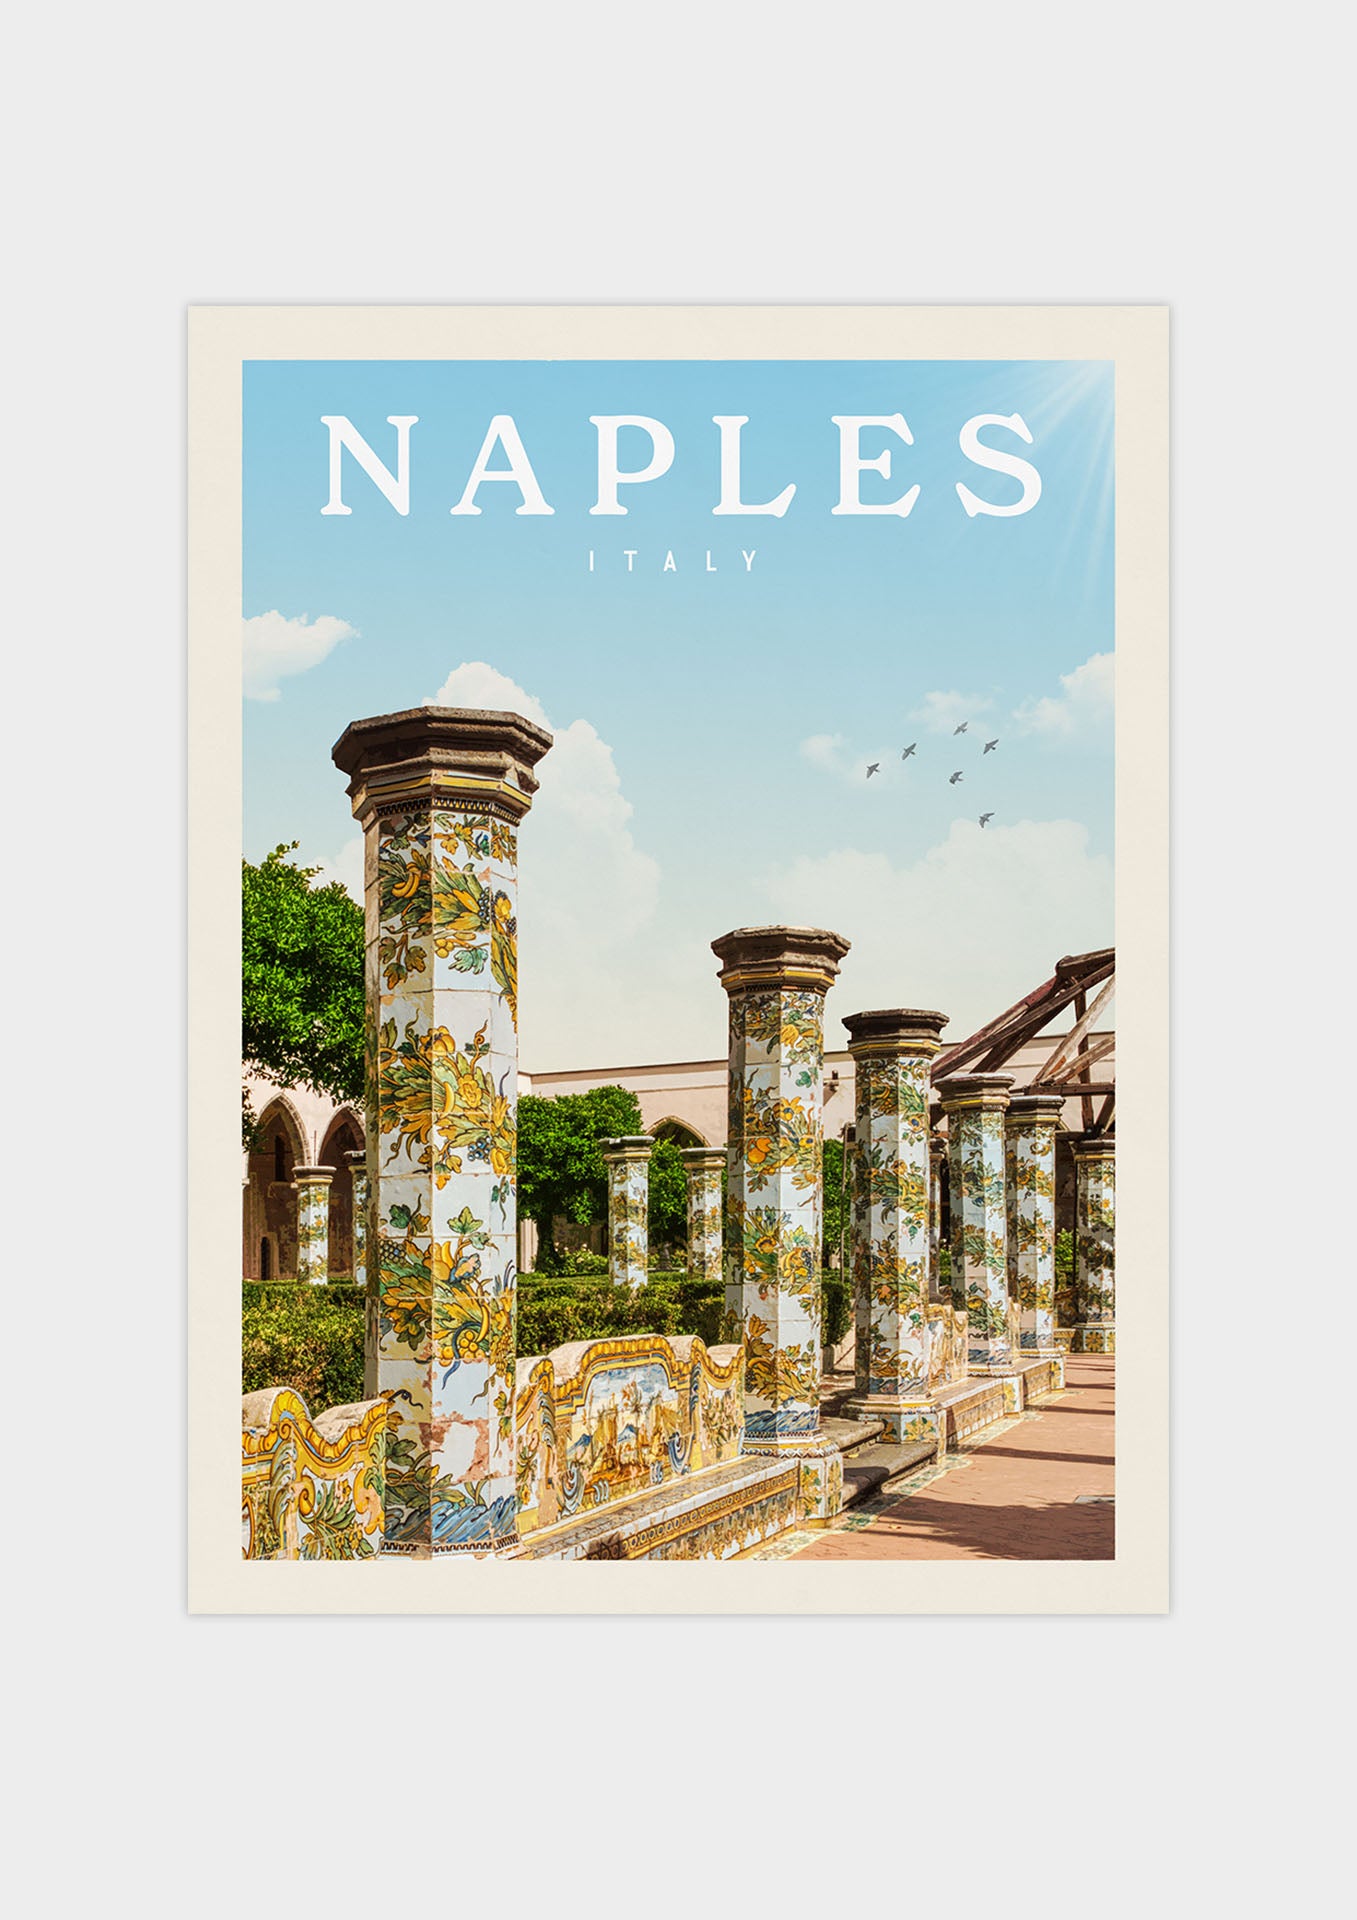 Naples, Italy - Vintage Travel Poster